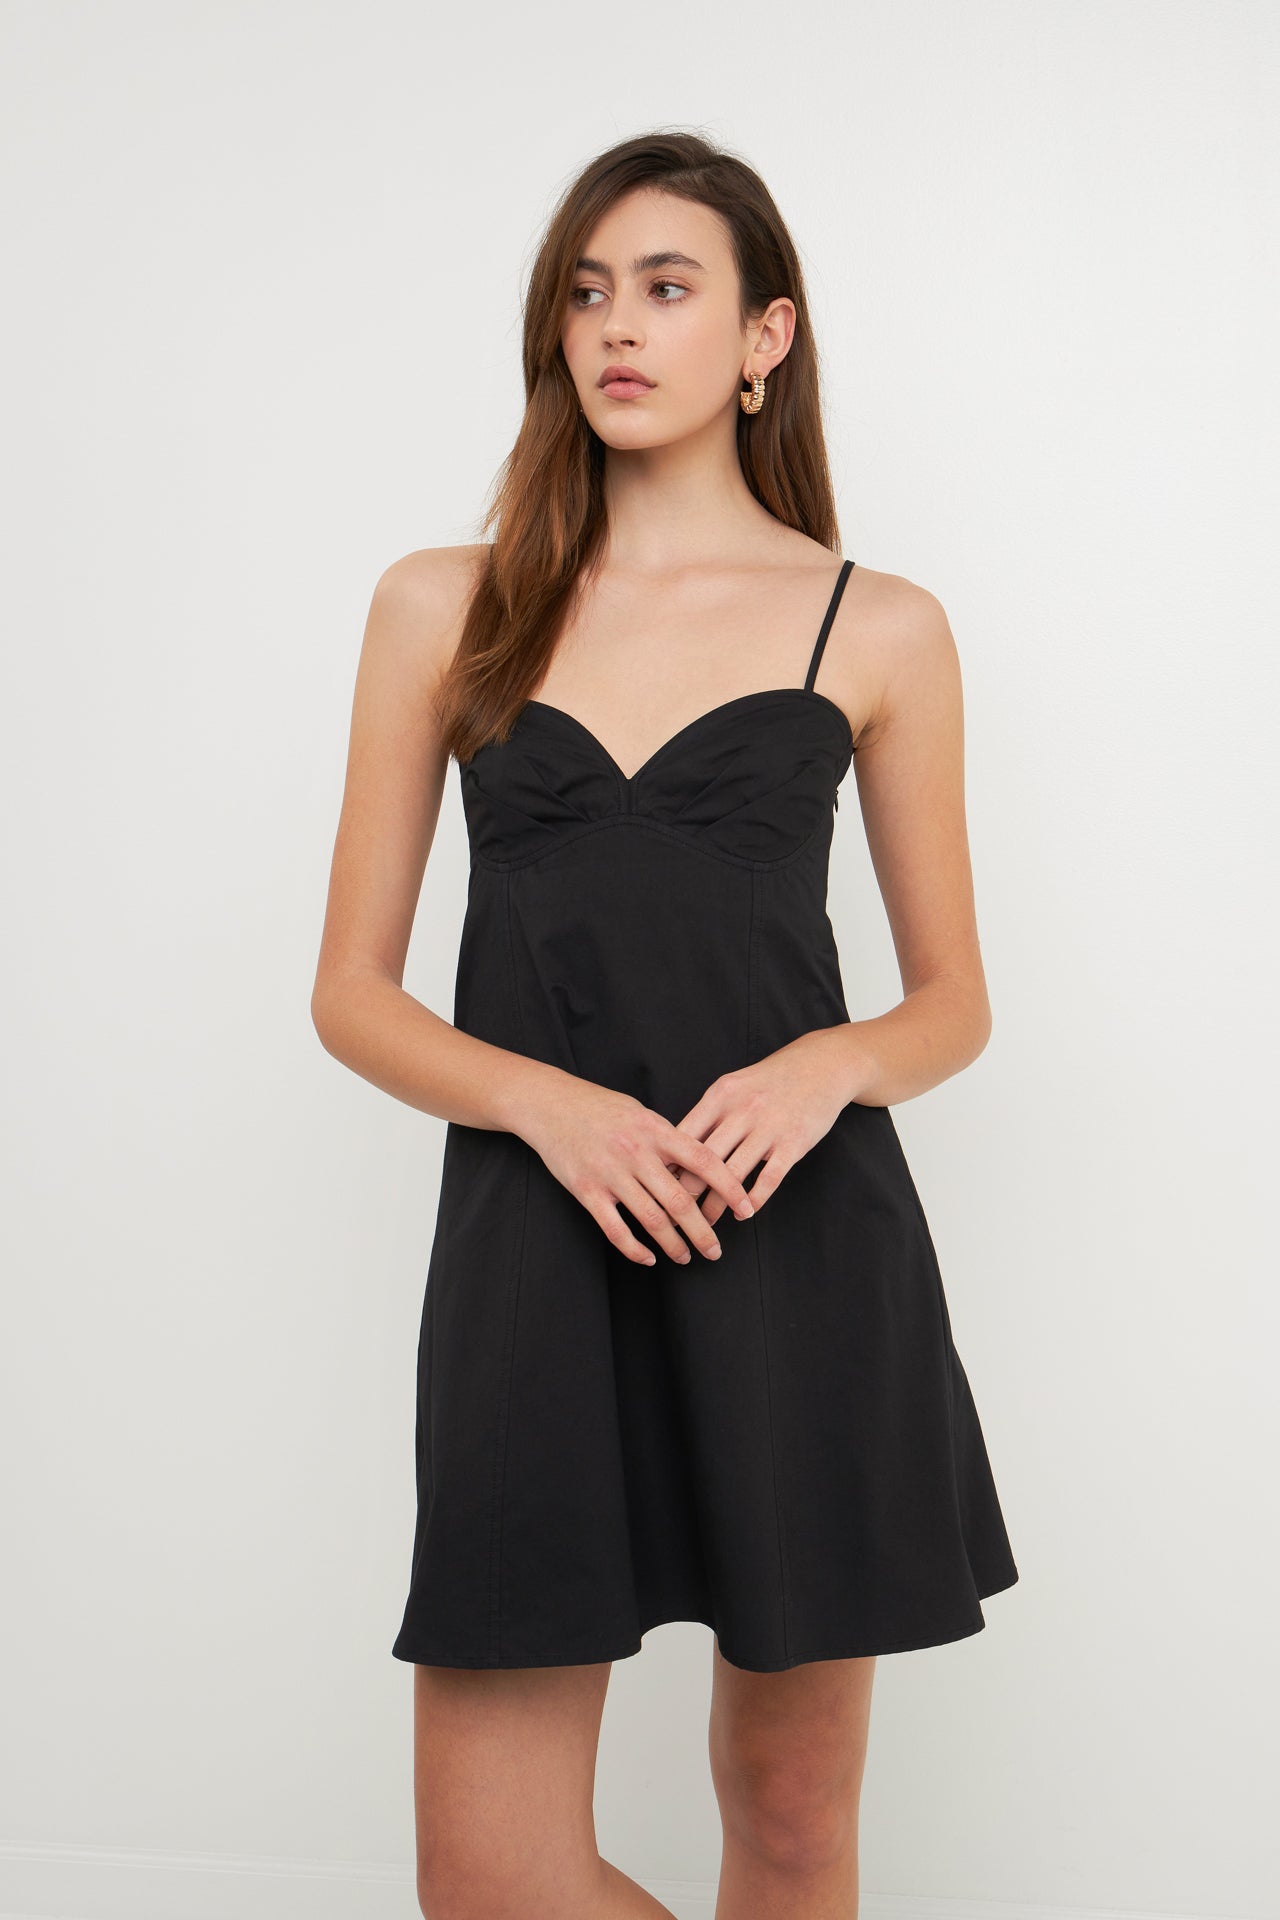 ENDLESS ROSE - Sweetheart Neckline Mini Dress - DRESSES available at Objectrare